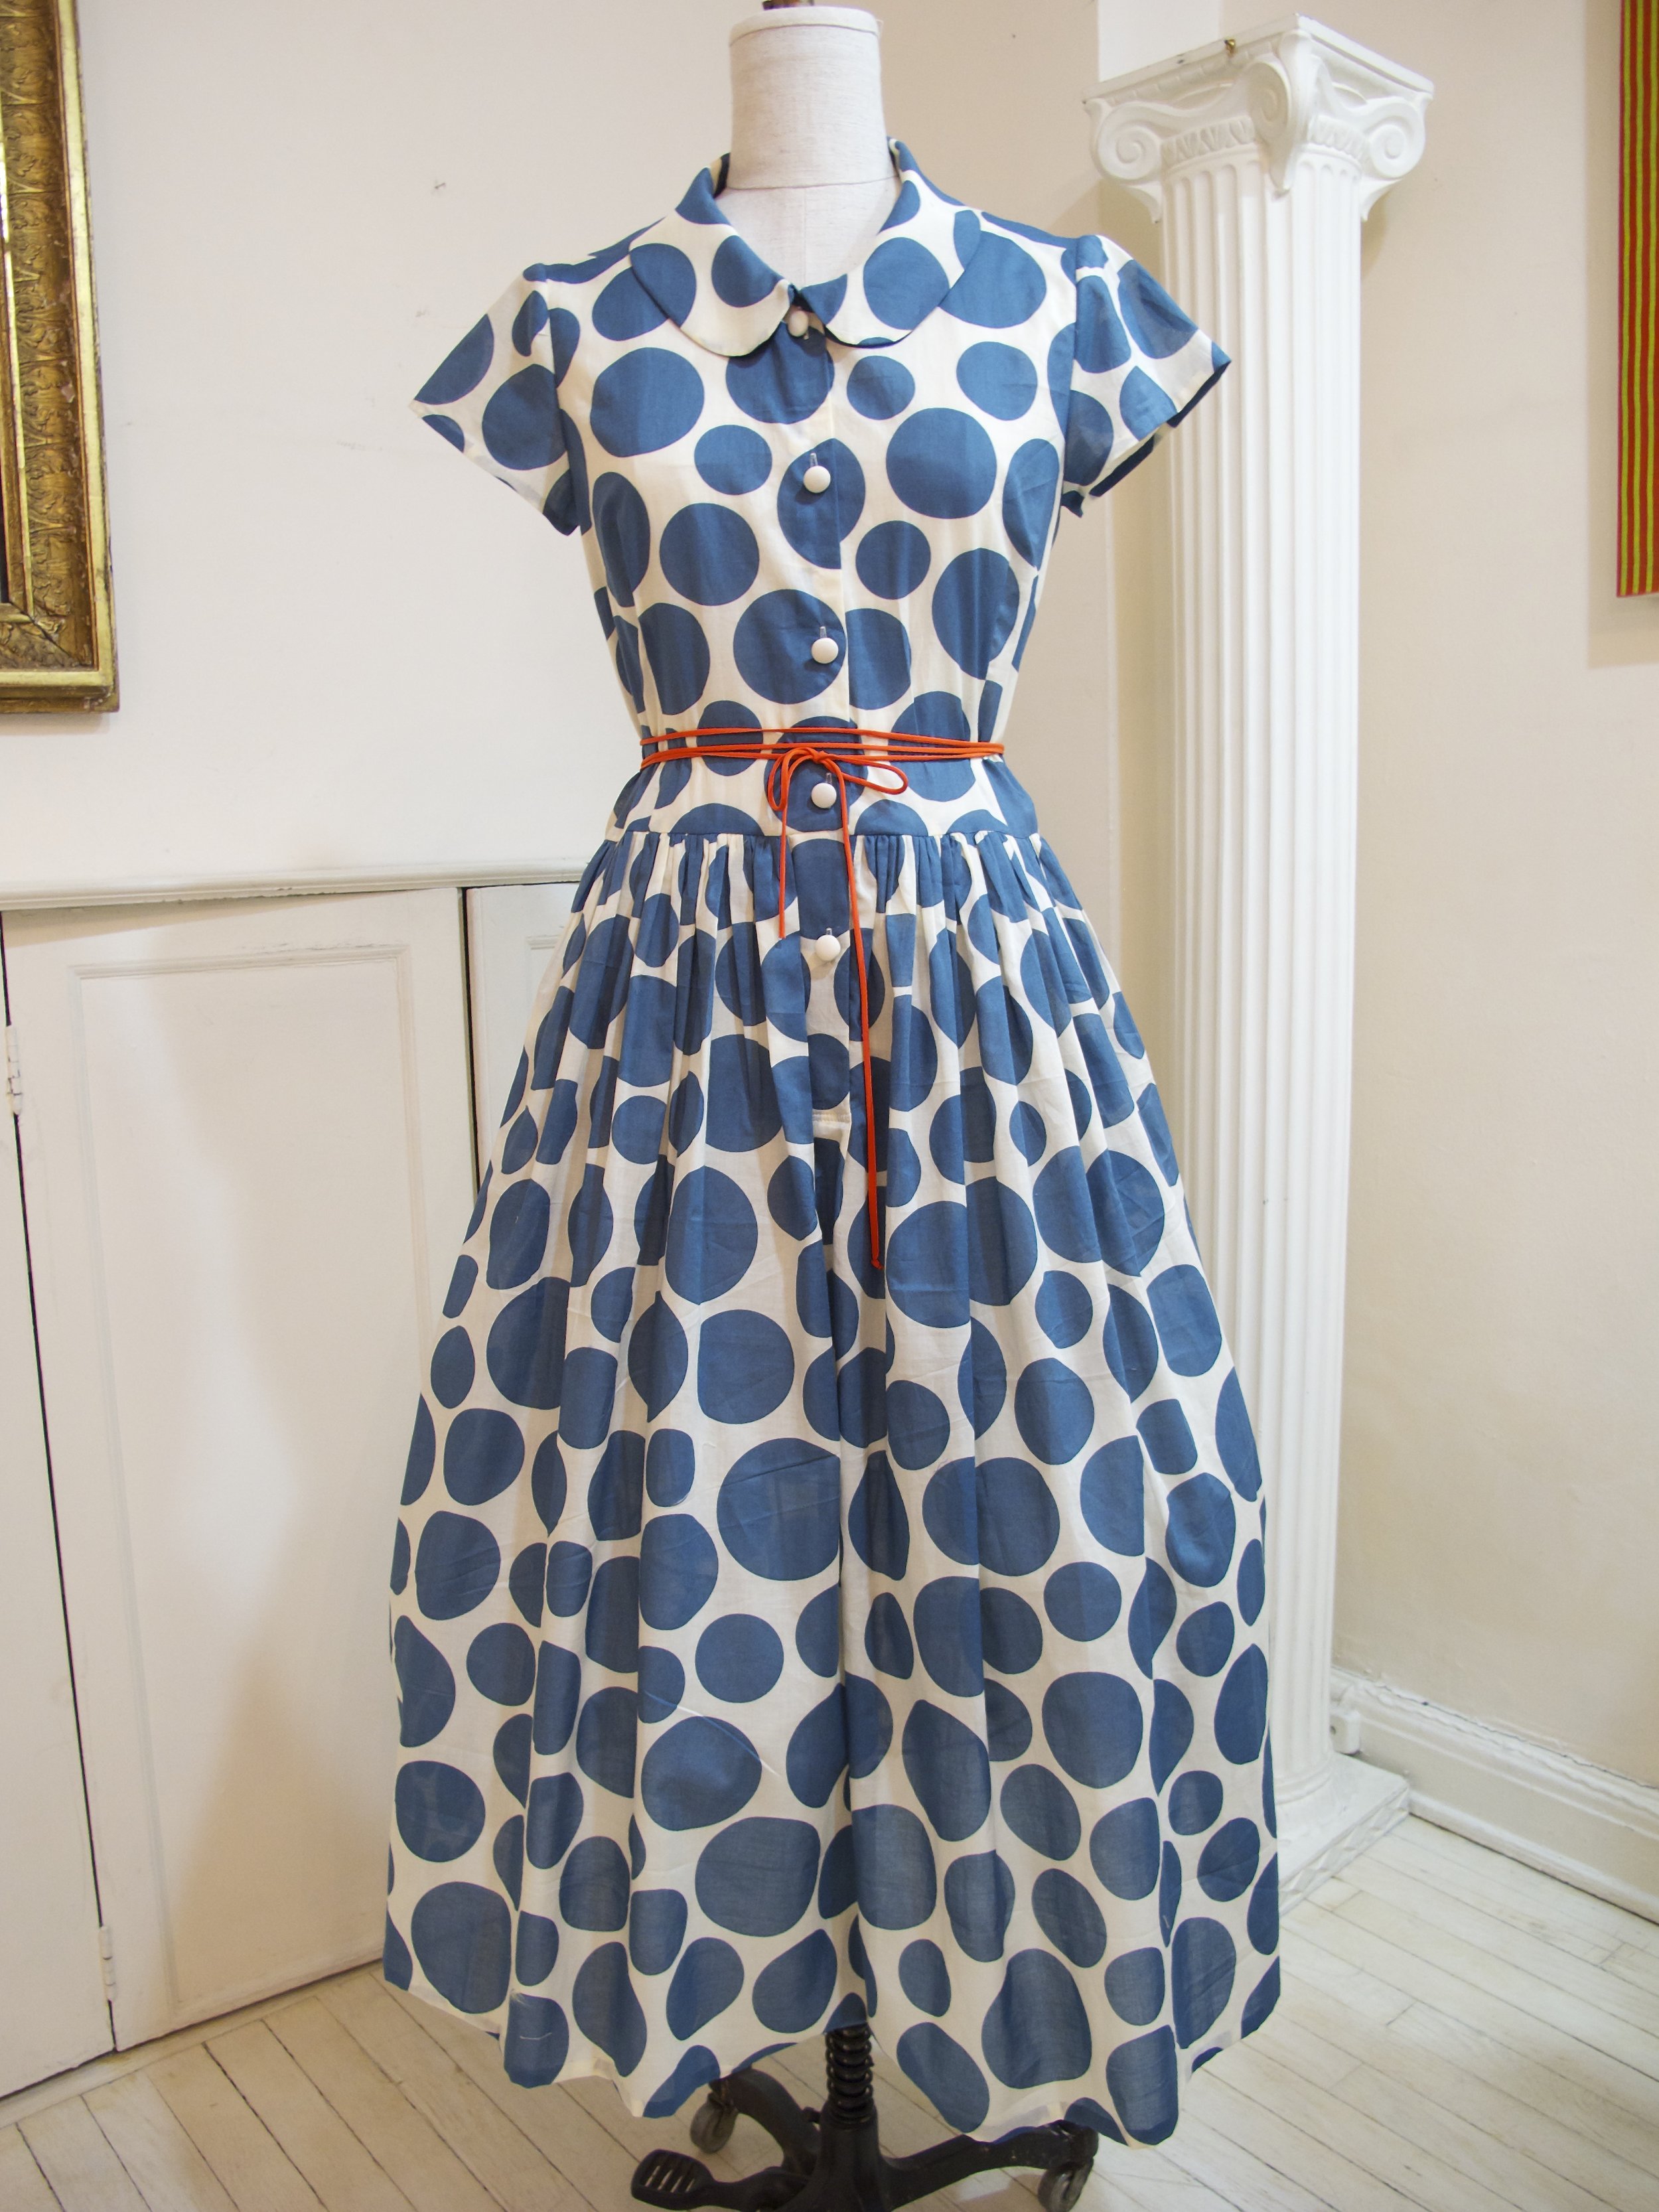  cotton voile polka-dot print shirt dress with fabric cord tie belt - sold 